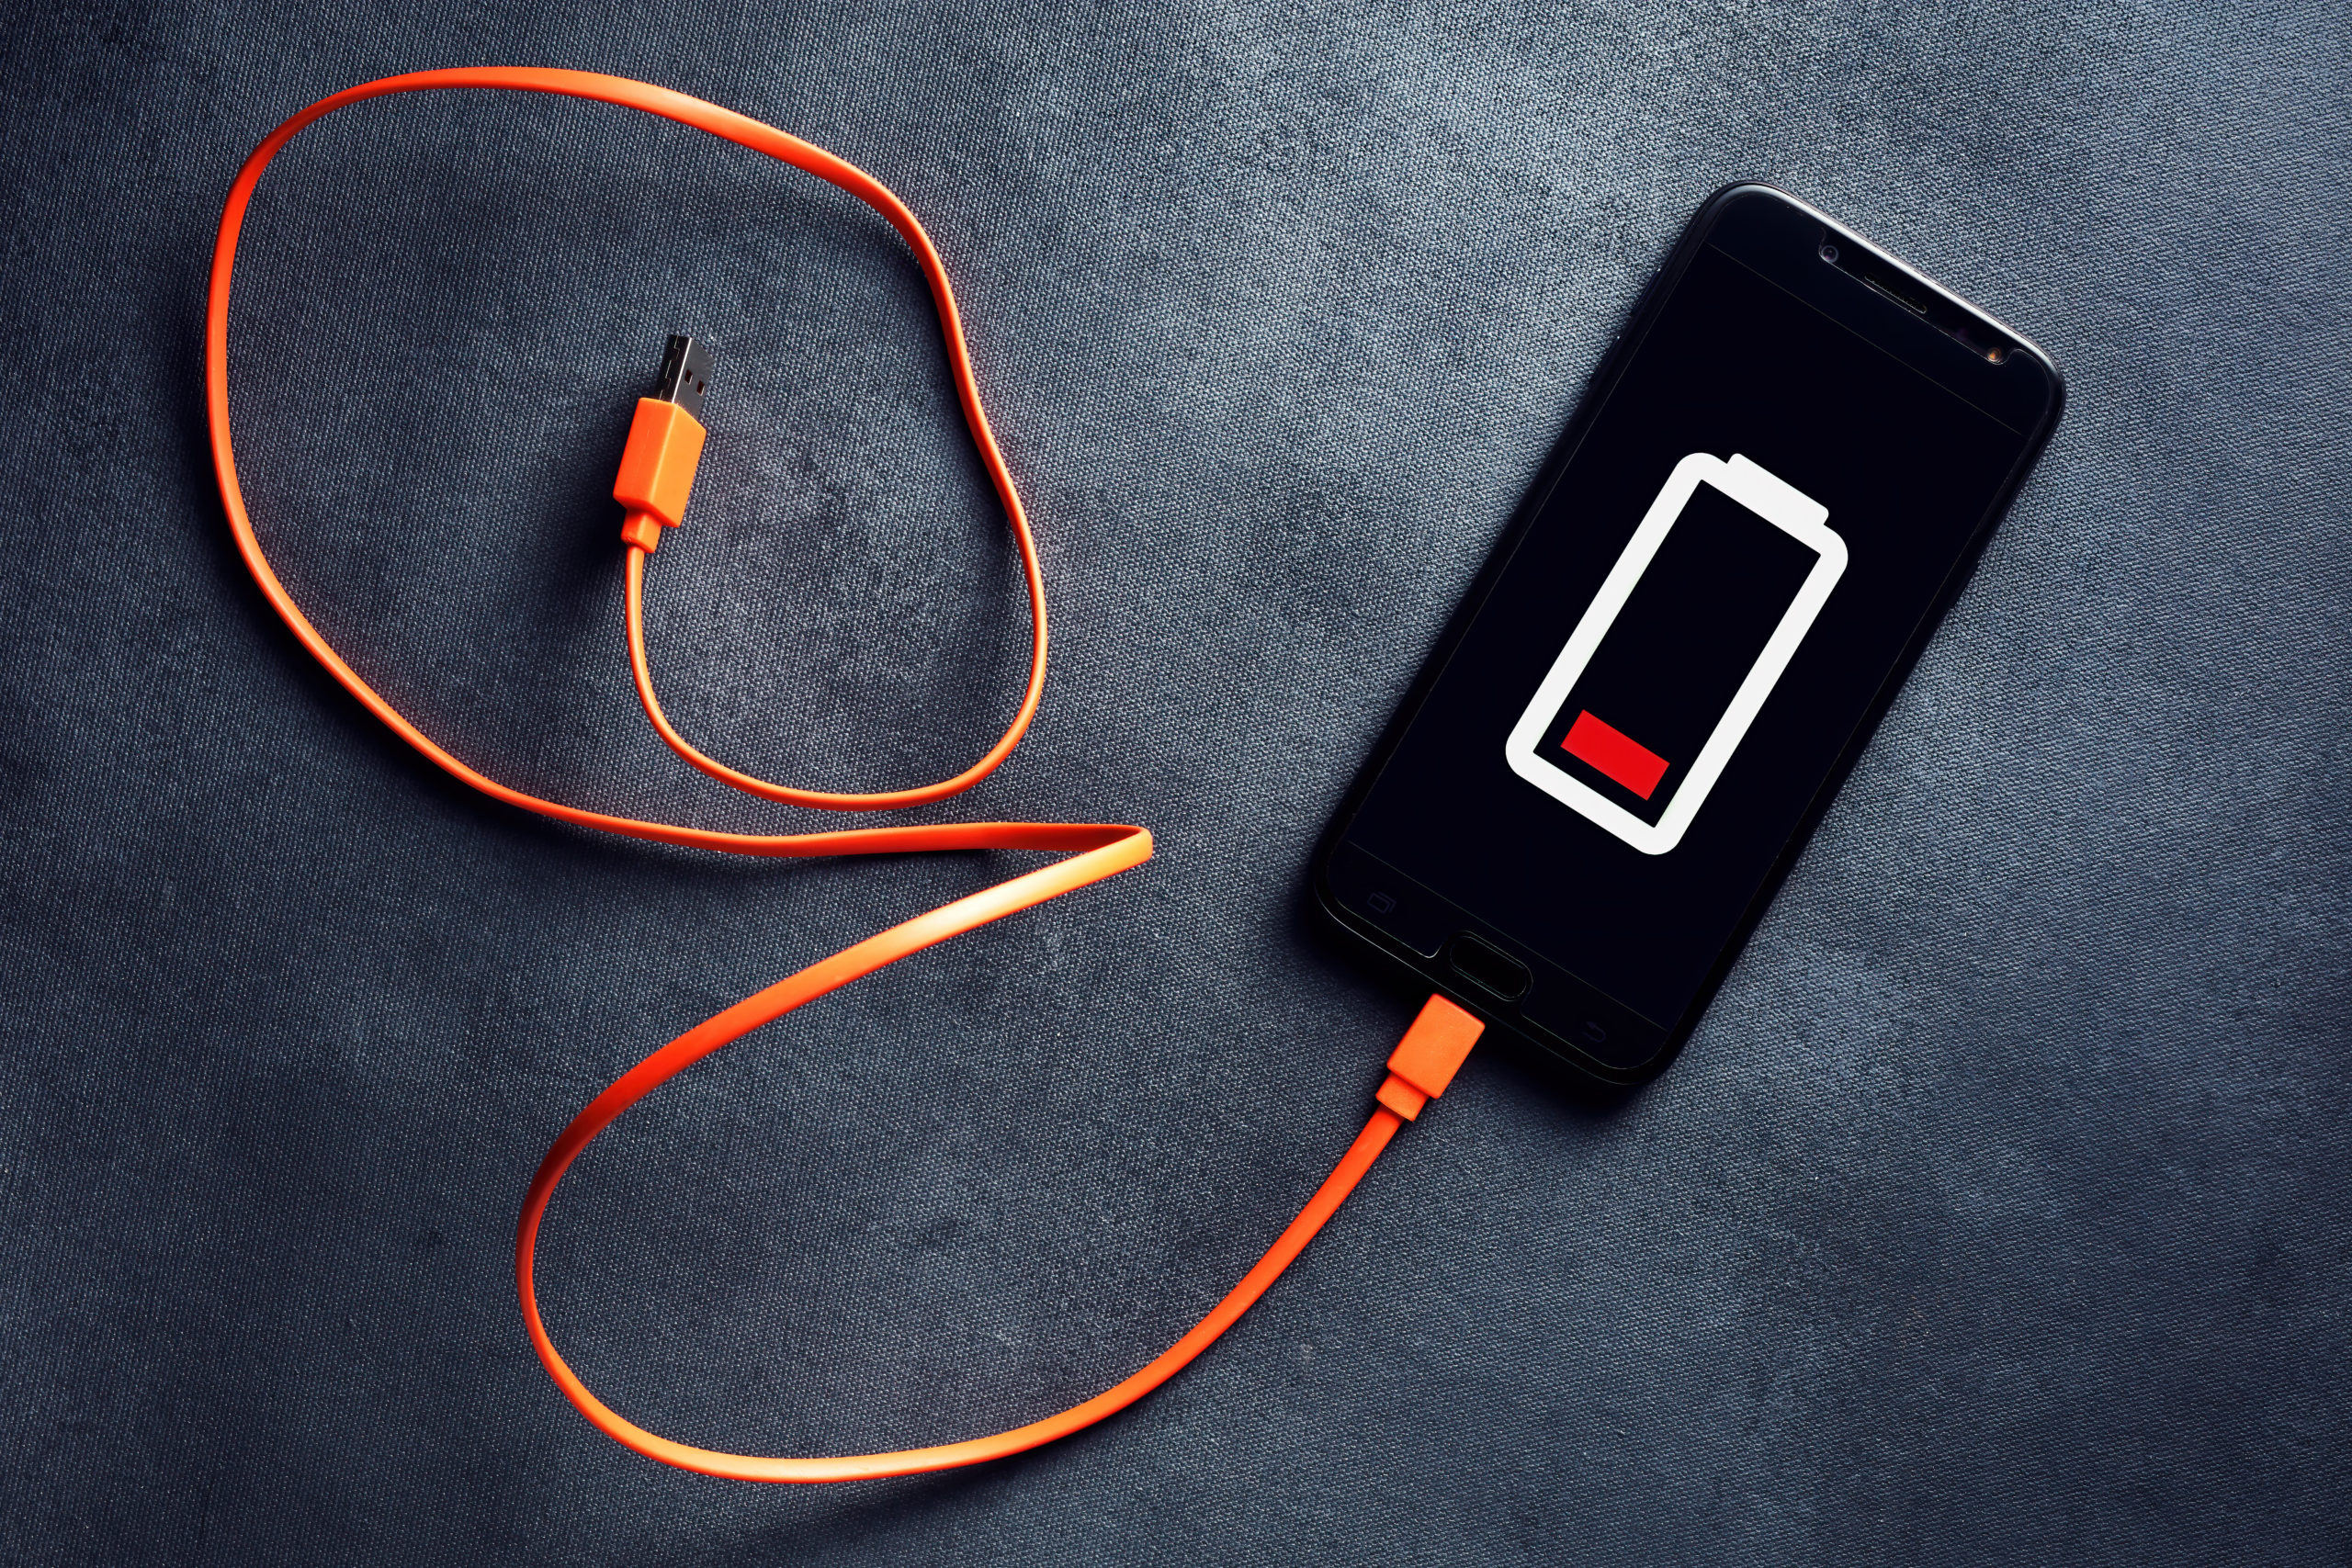 Your cell phone battery doesn’t last because of these three useless functions